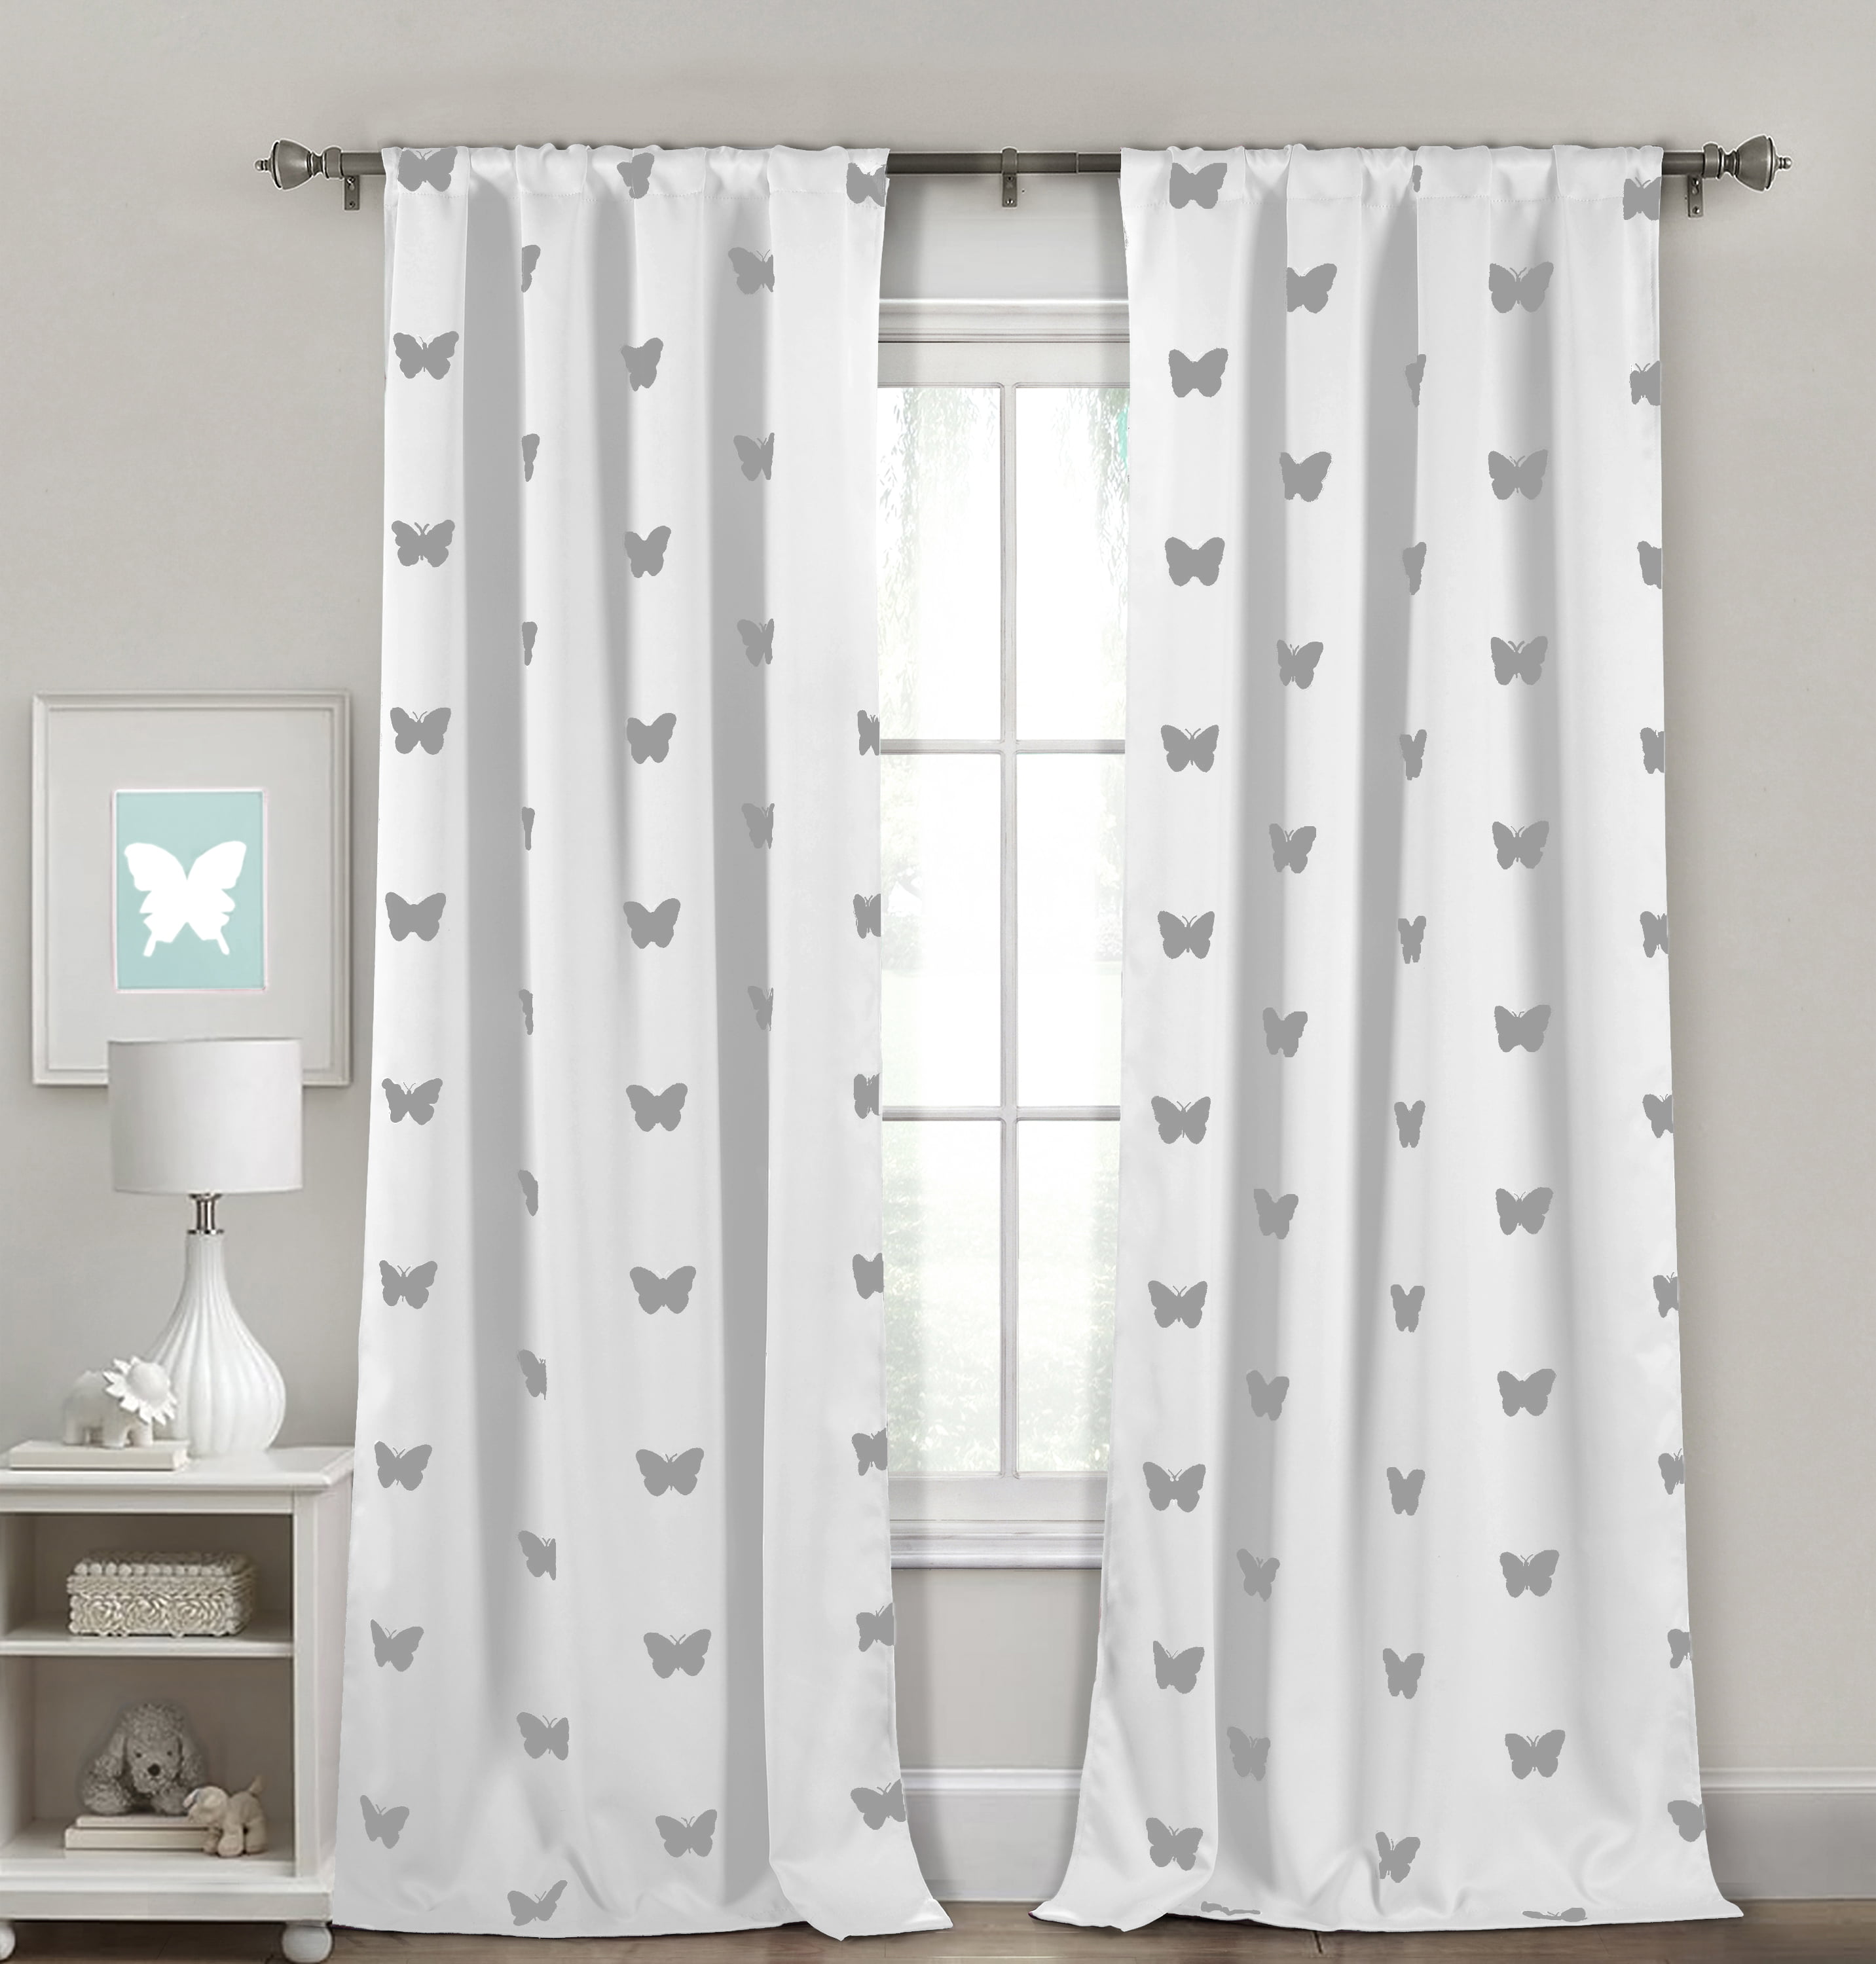 Graceful Butterfly 3D Blockout Photo Curtain Print Curtains Fabric Kids Window 